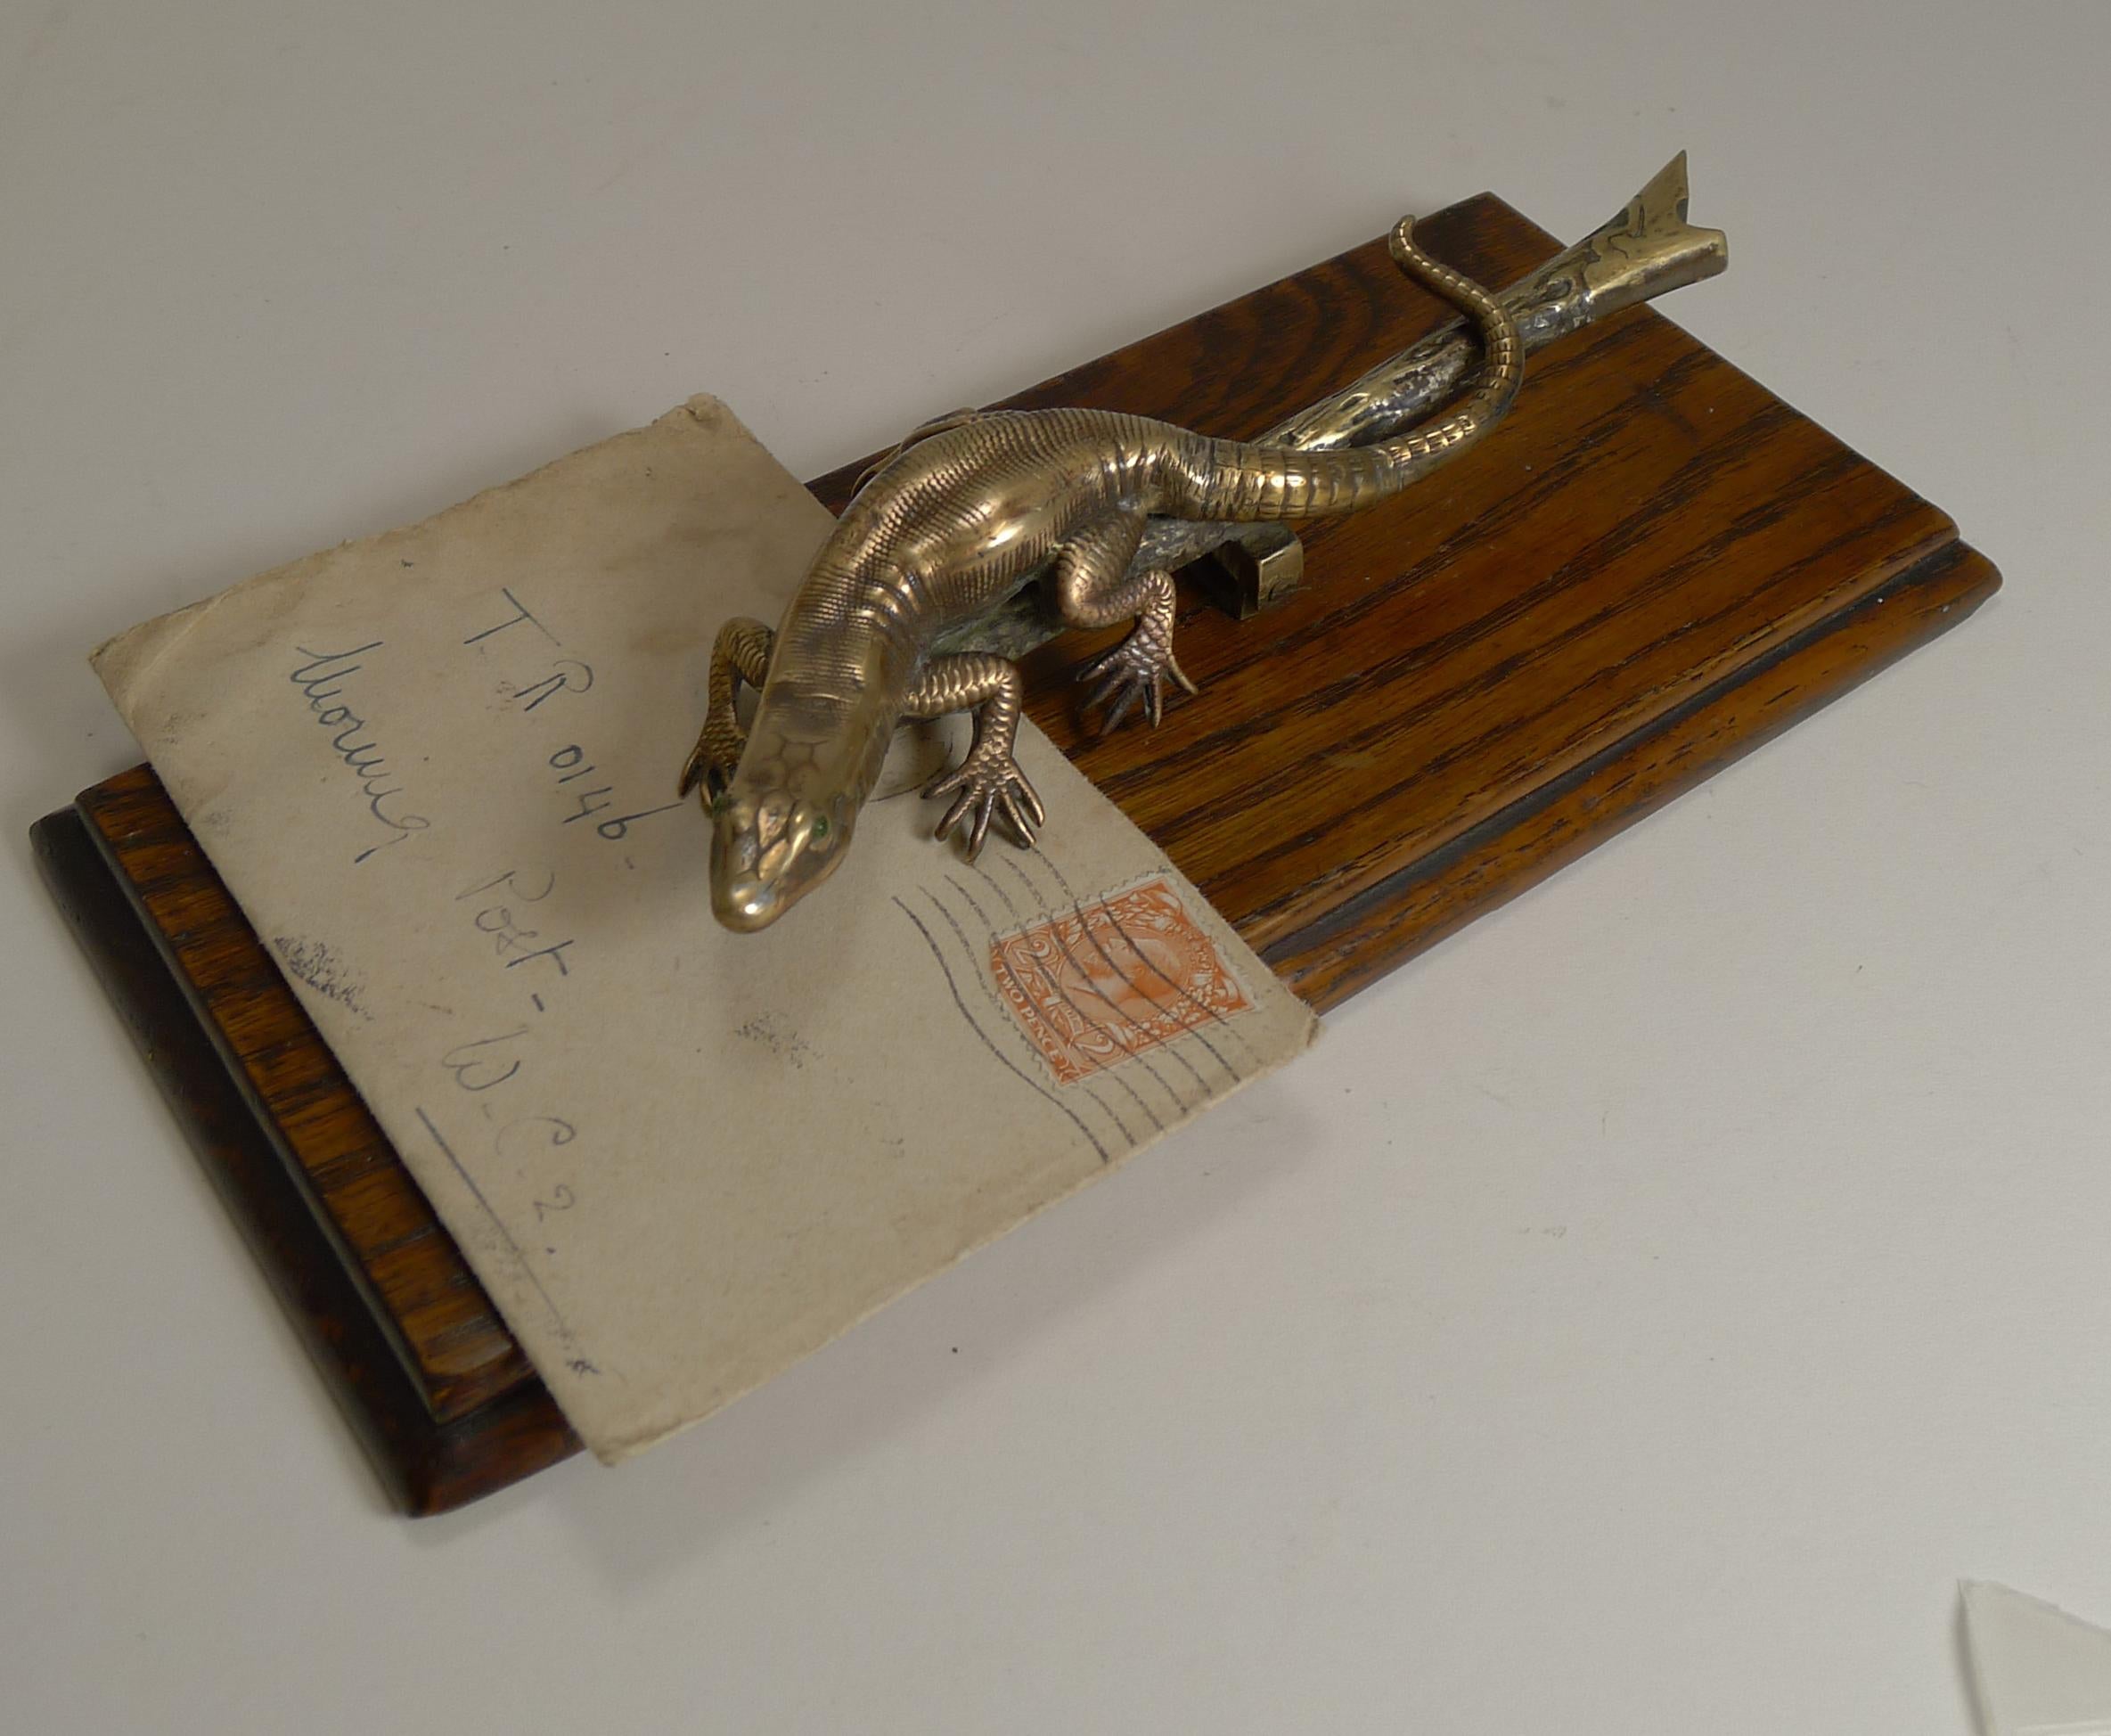 A fabulous novelty desk-top letter clip sporting a wonderful lizard on a naturalistic branch and retaining his two little green glass eyes.

The sprung clip is perfect for business cards to keeping those stray notes in order. The sprung clip has a